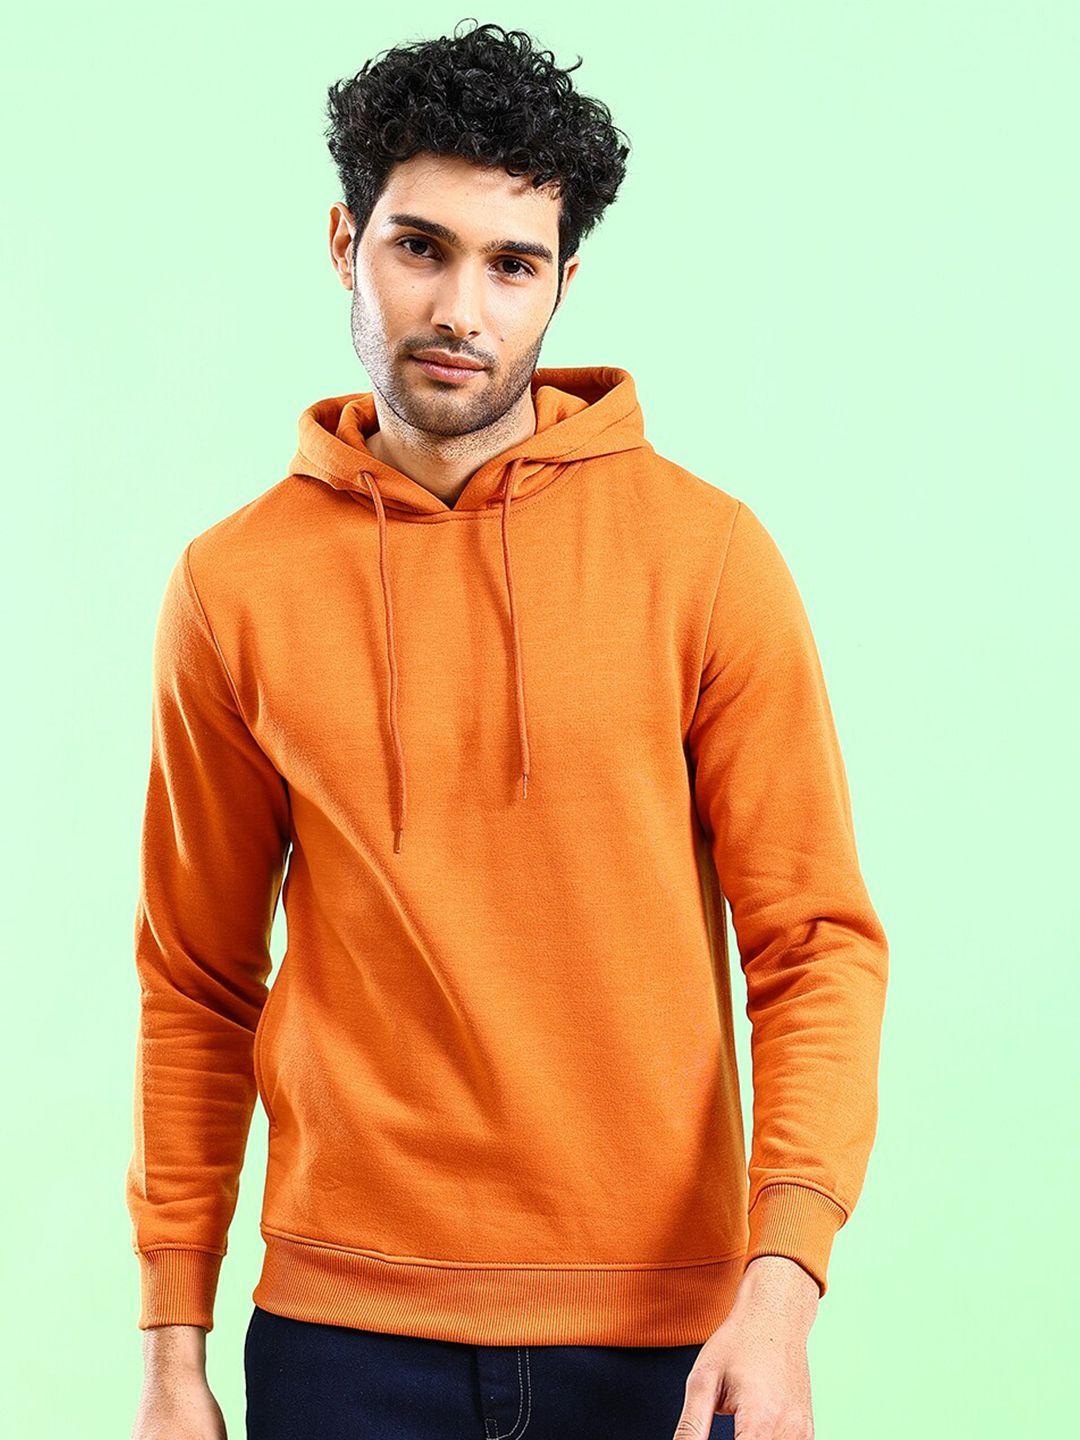 the-indian-garage-co-hooded-pullover-sweatshirt